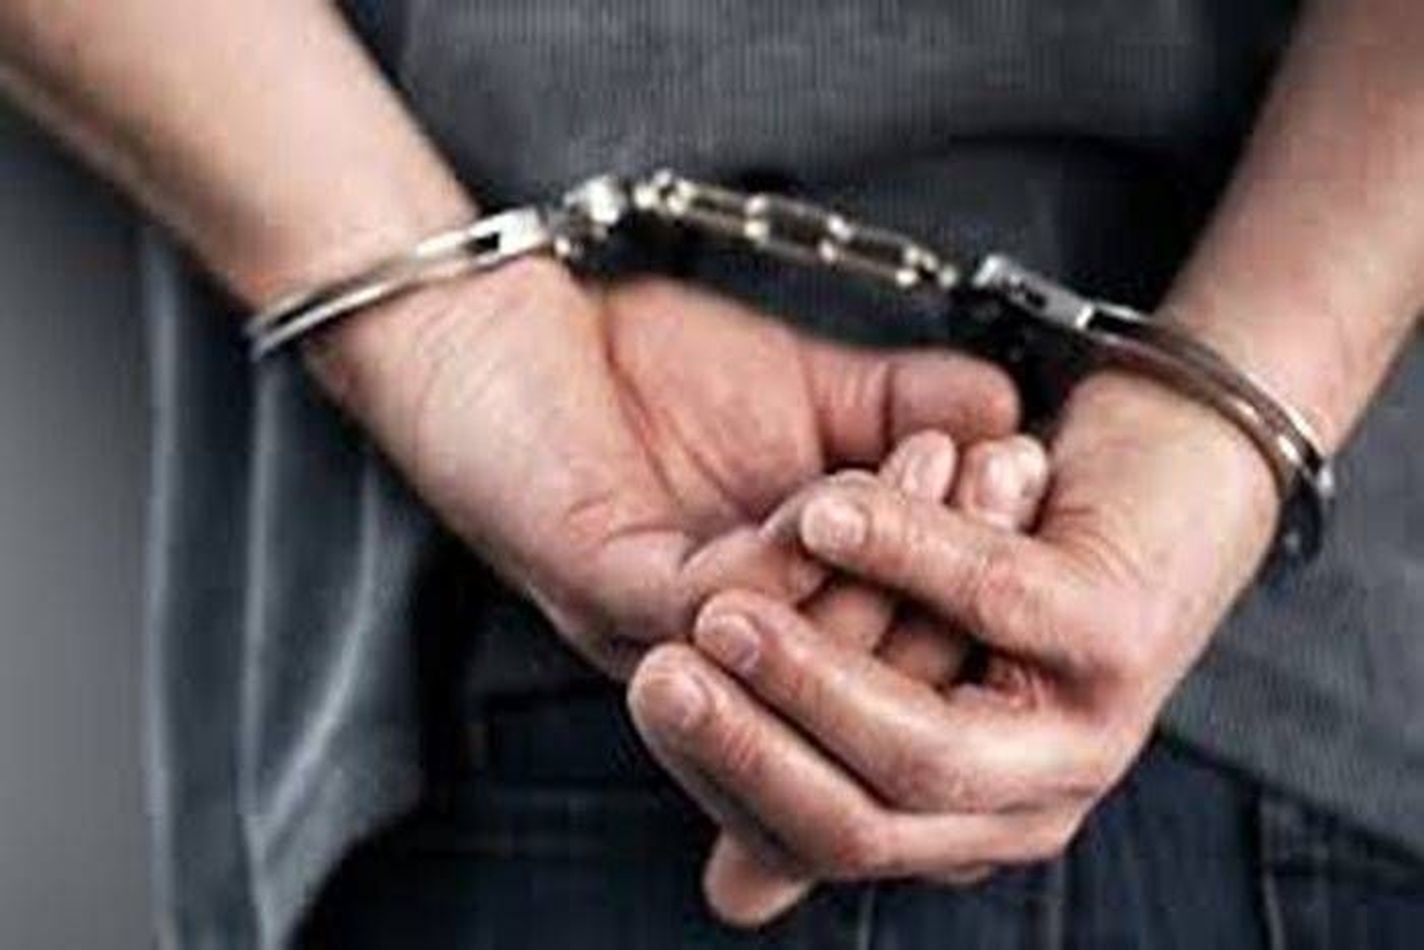 Bikaner news : Wife dropped from roof, husband arrested